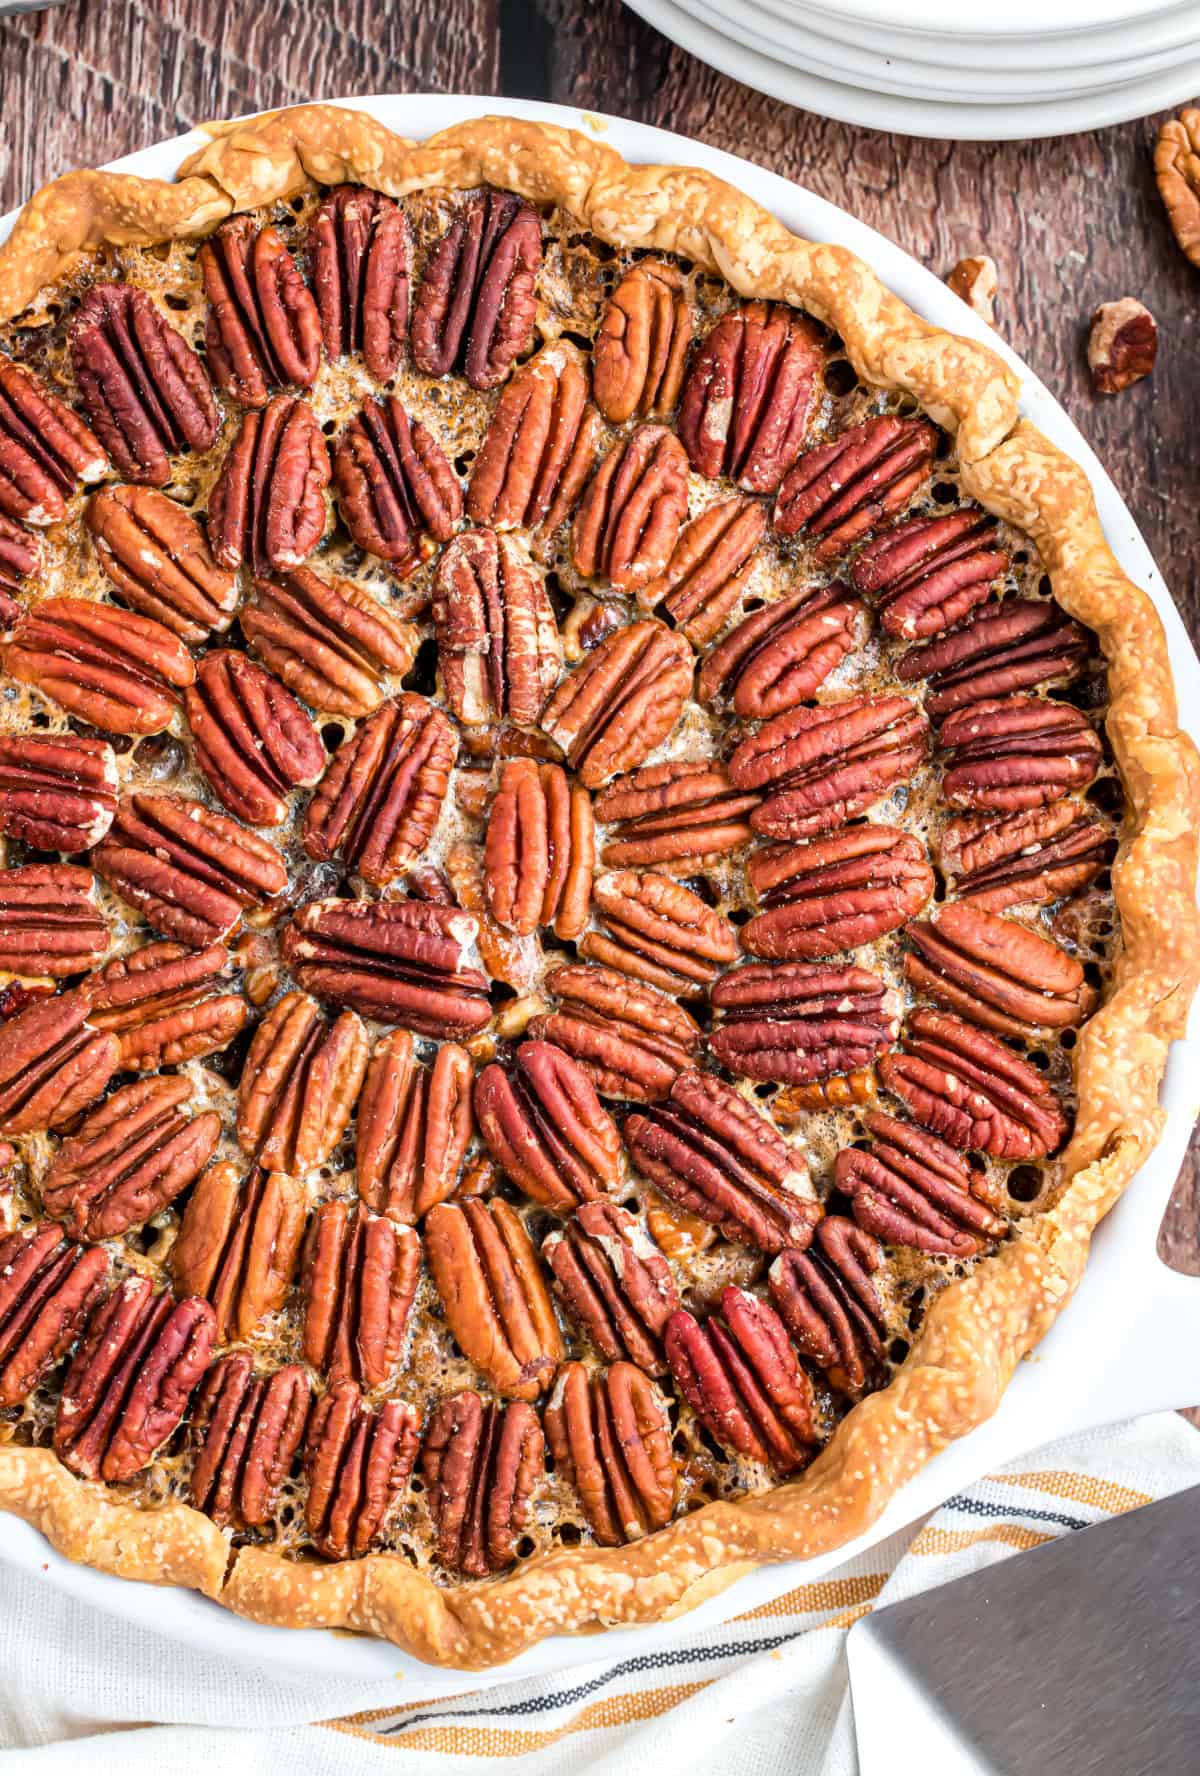 Whole pecan pie after baking.